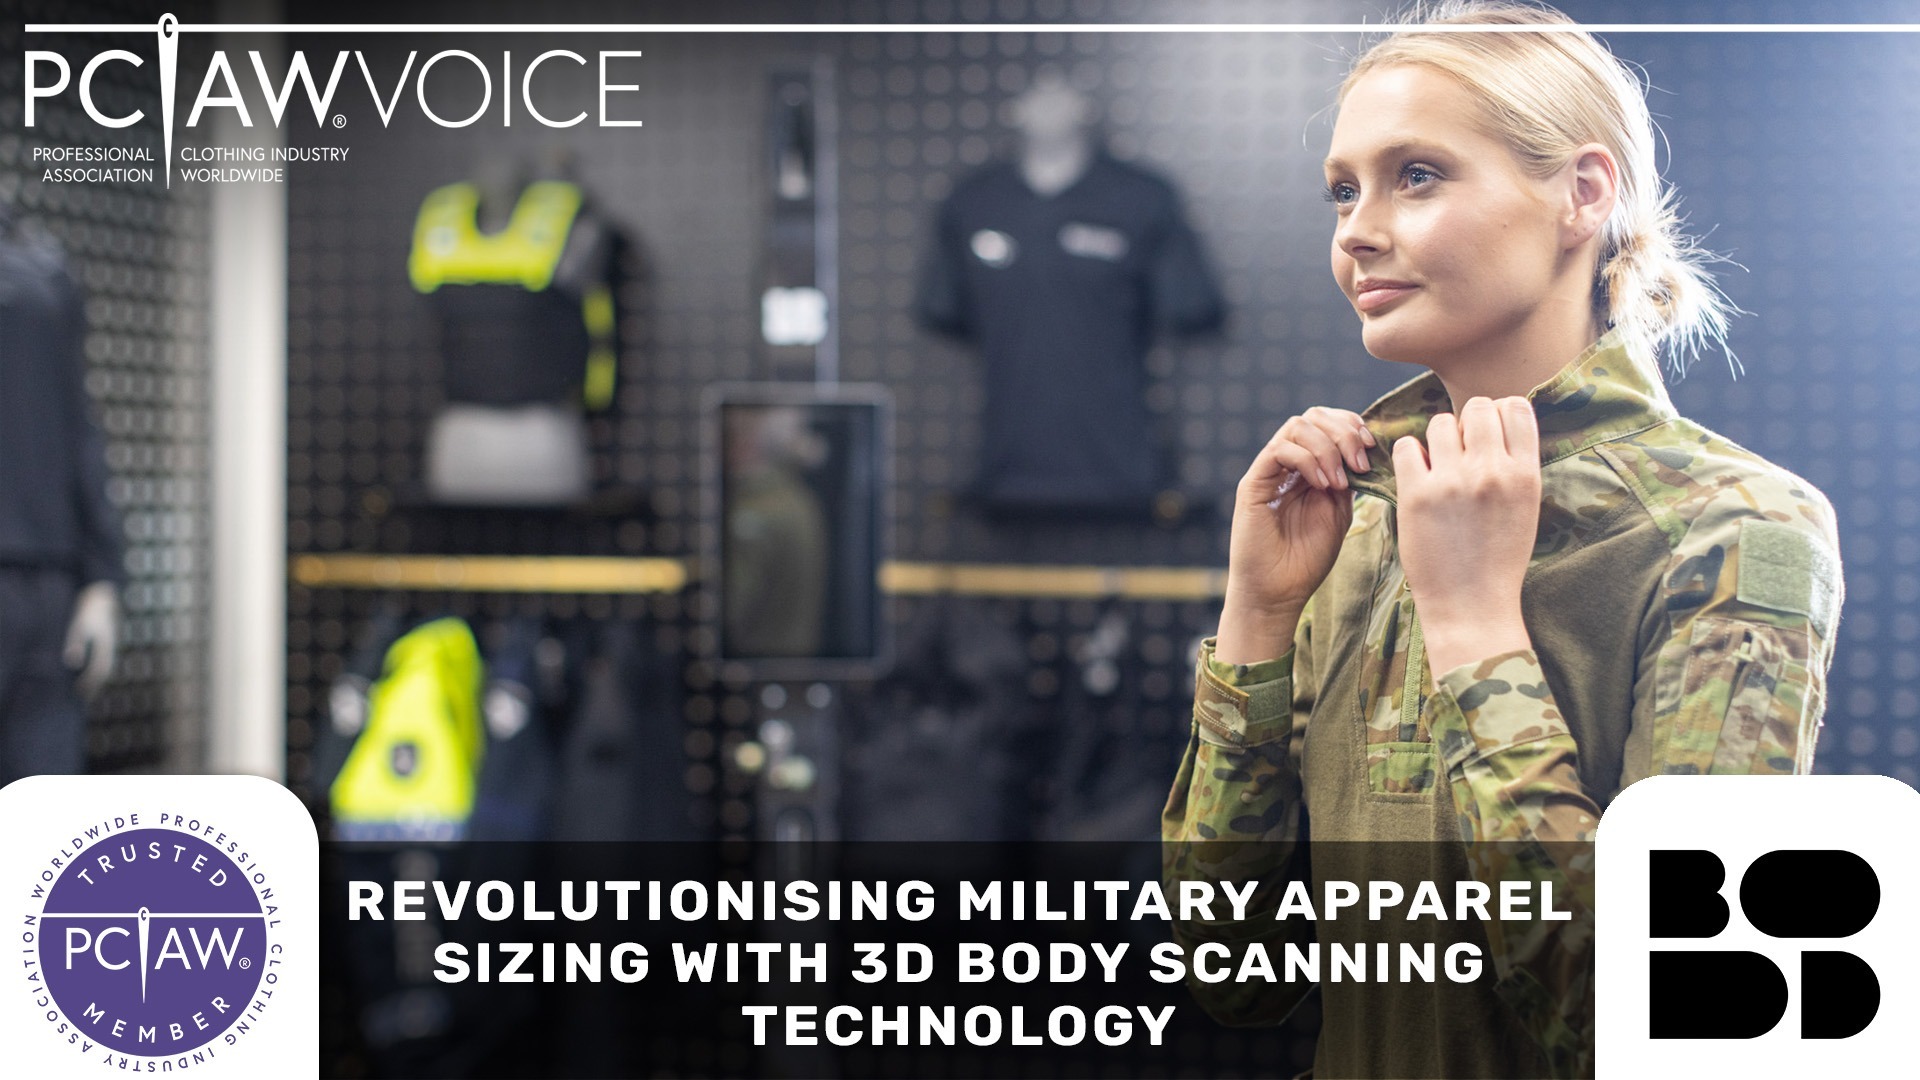 Revolutionising Military Apparel Sizing With 3DBody Scanning Technology